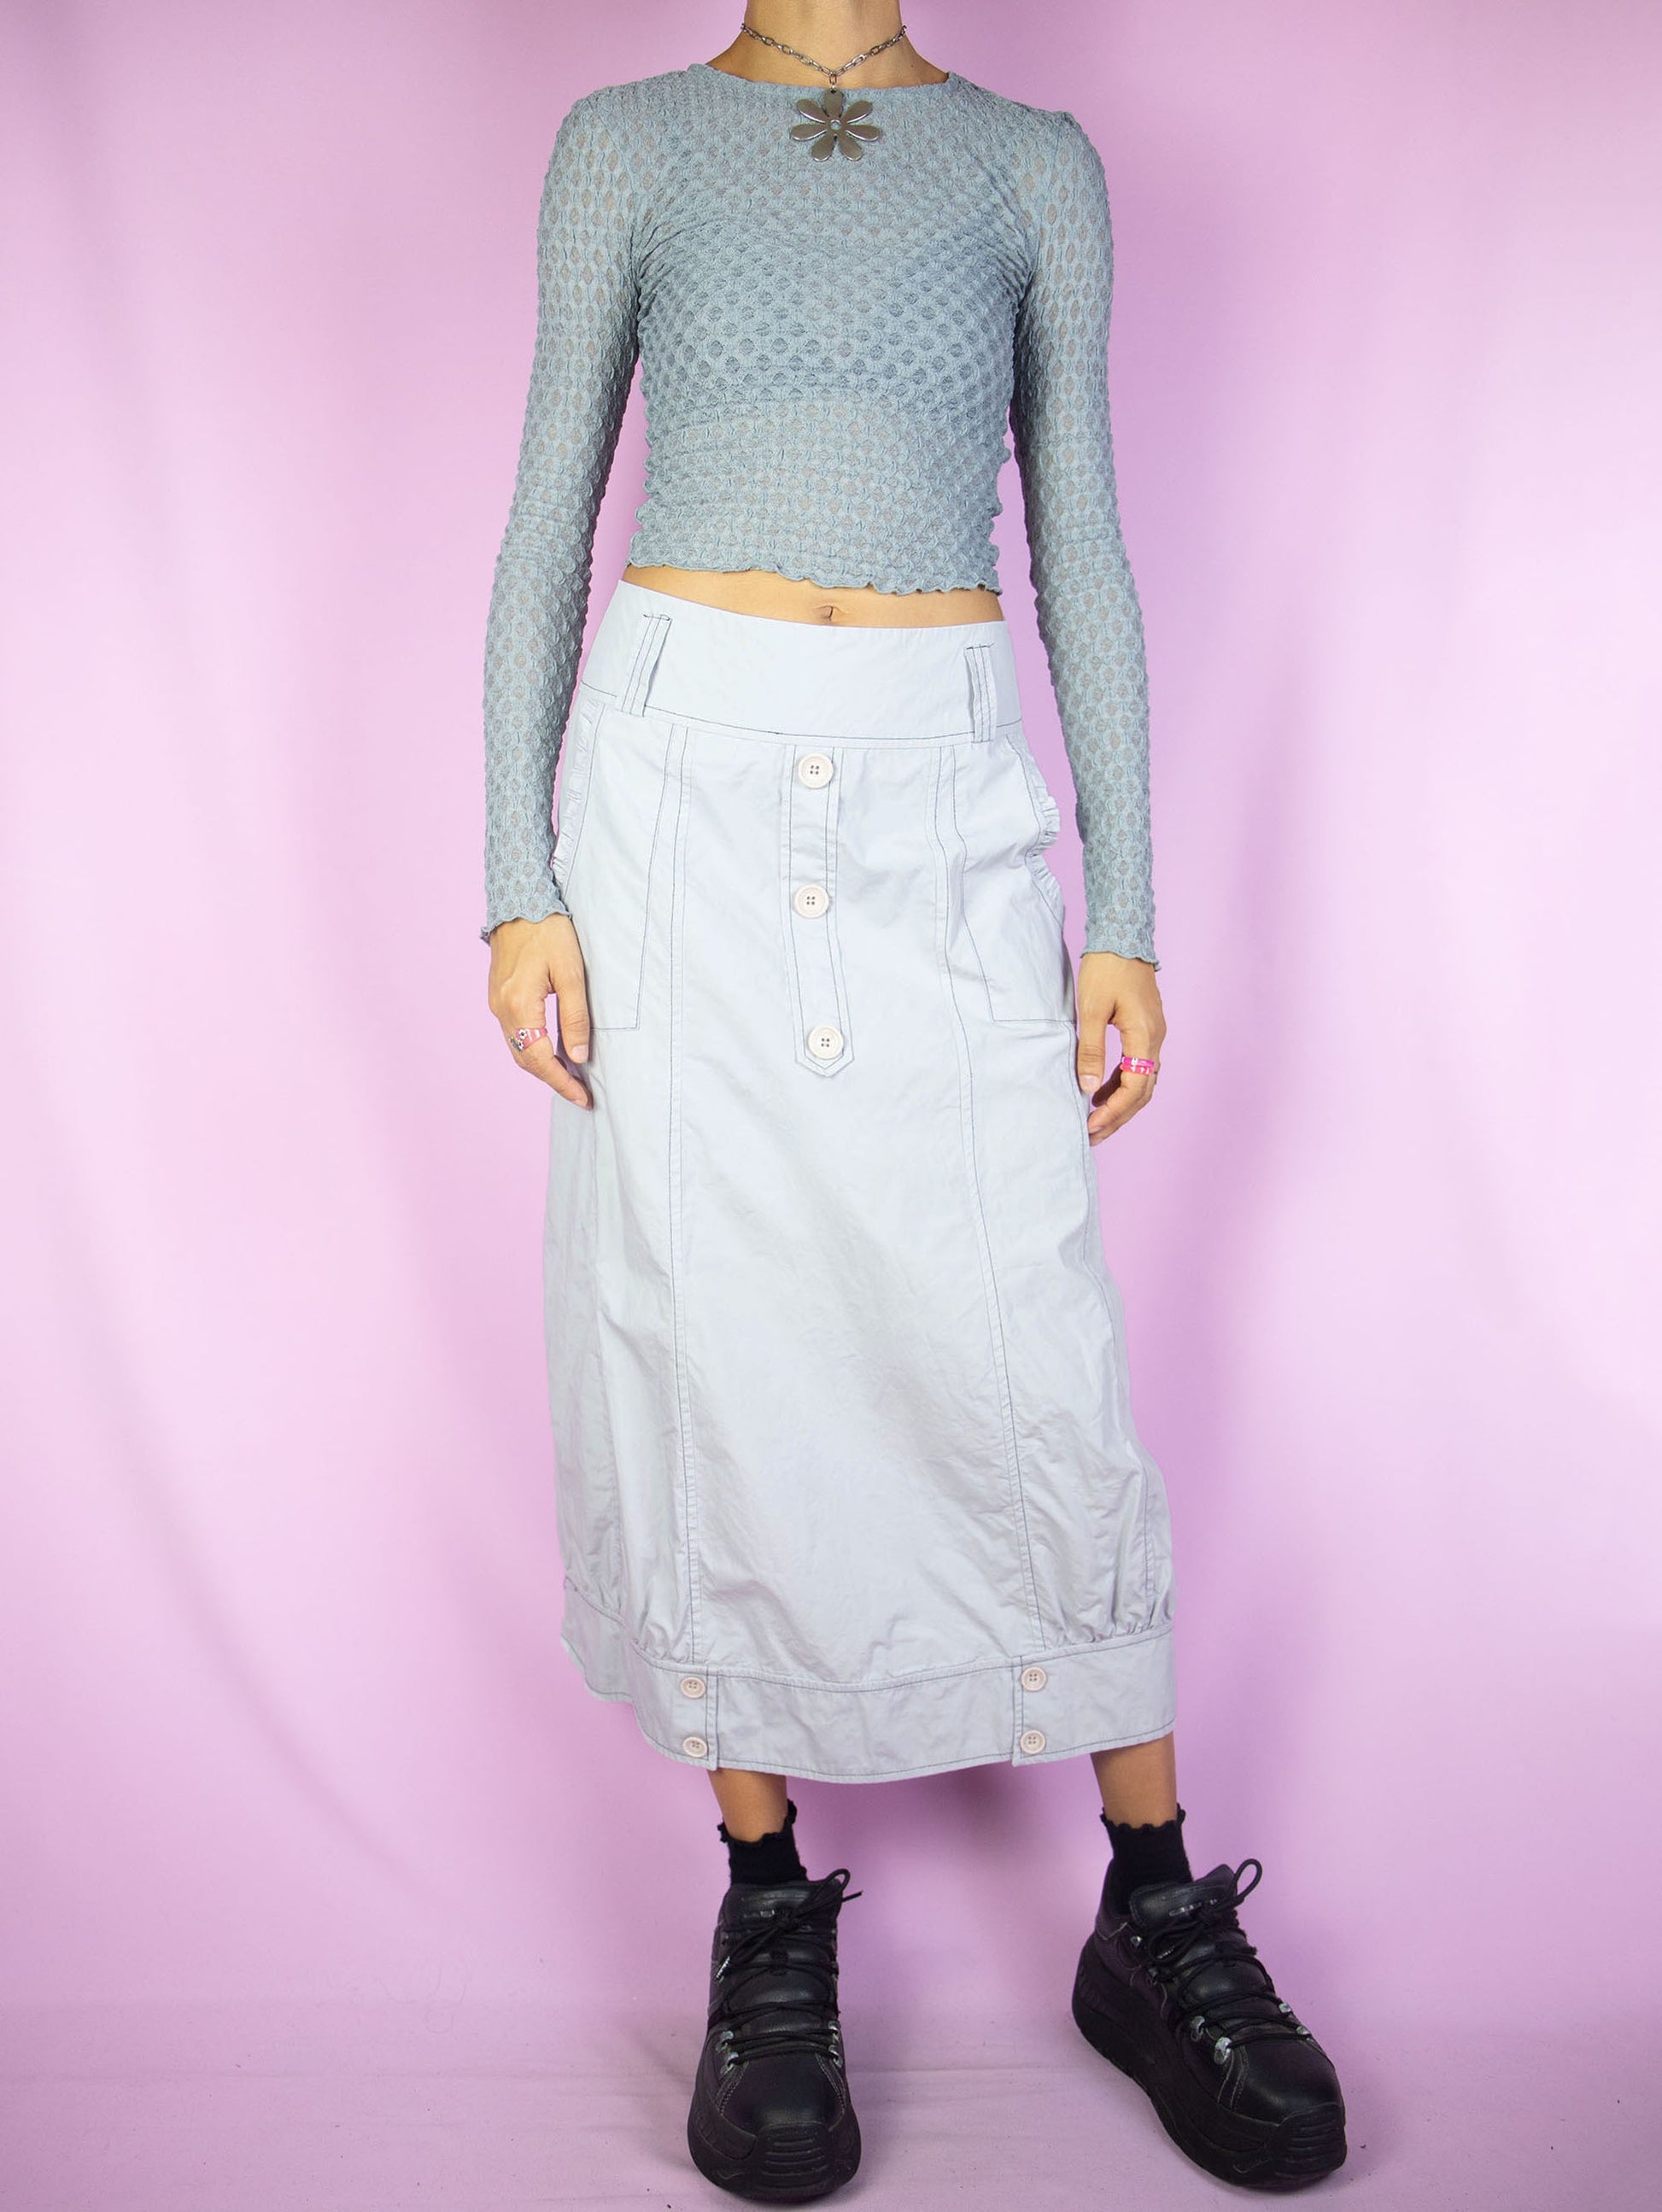 The Y2K Light Gray Midi Skirt is a vintage paneled light gray skirt with pockets and buttons and side zipper closure. Cyber goth gorpcore 2000s parachute cargo maxi skirt.